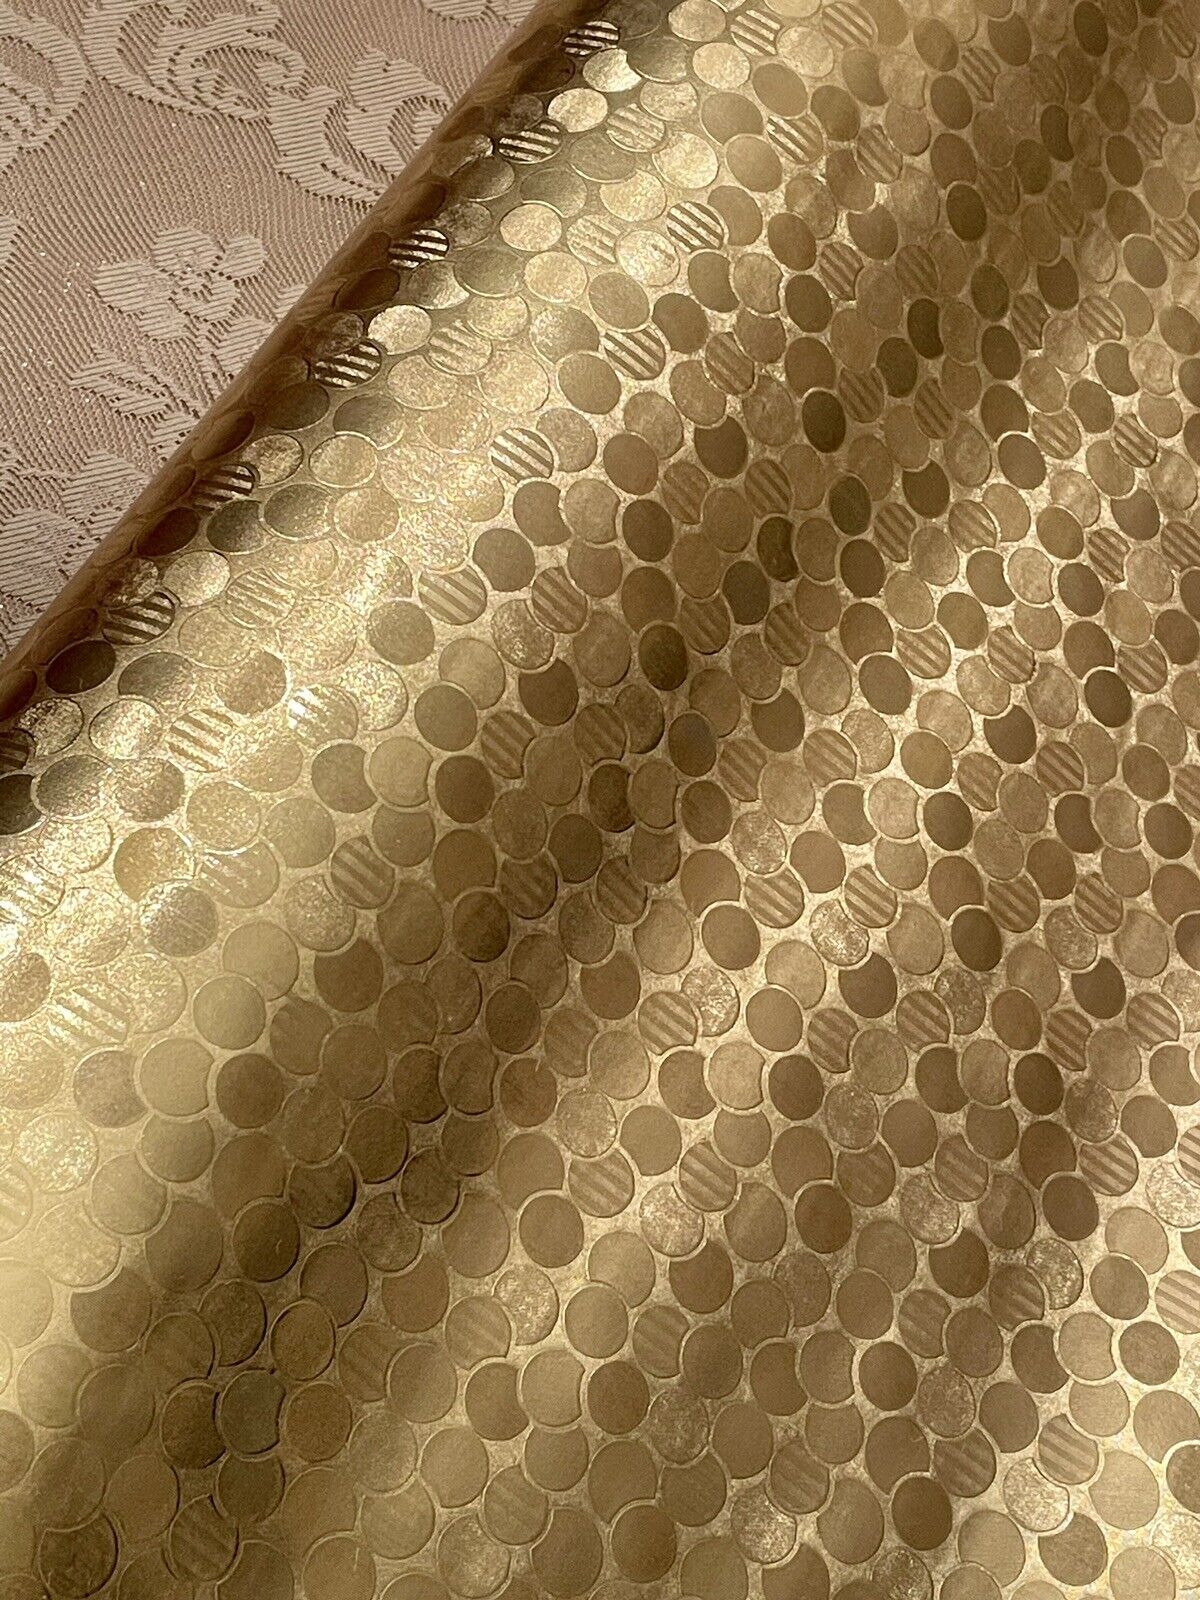 VTG CHRISTMAS GOLD CIRCLES TEXTURED FOIL WRAPPING PAPER GIFT WRAP 1960